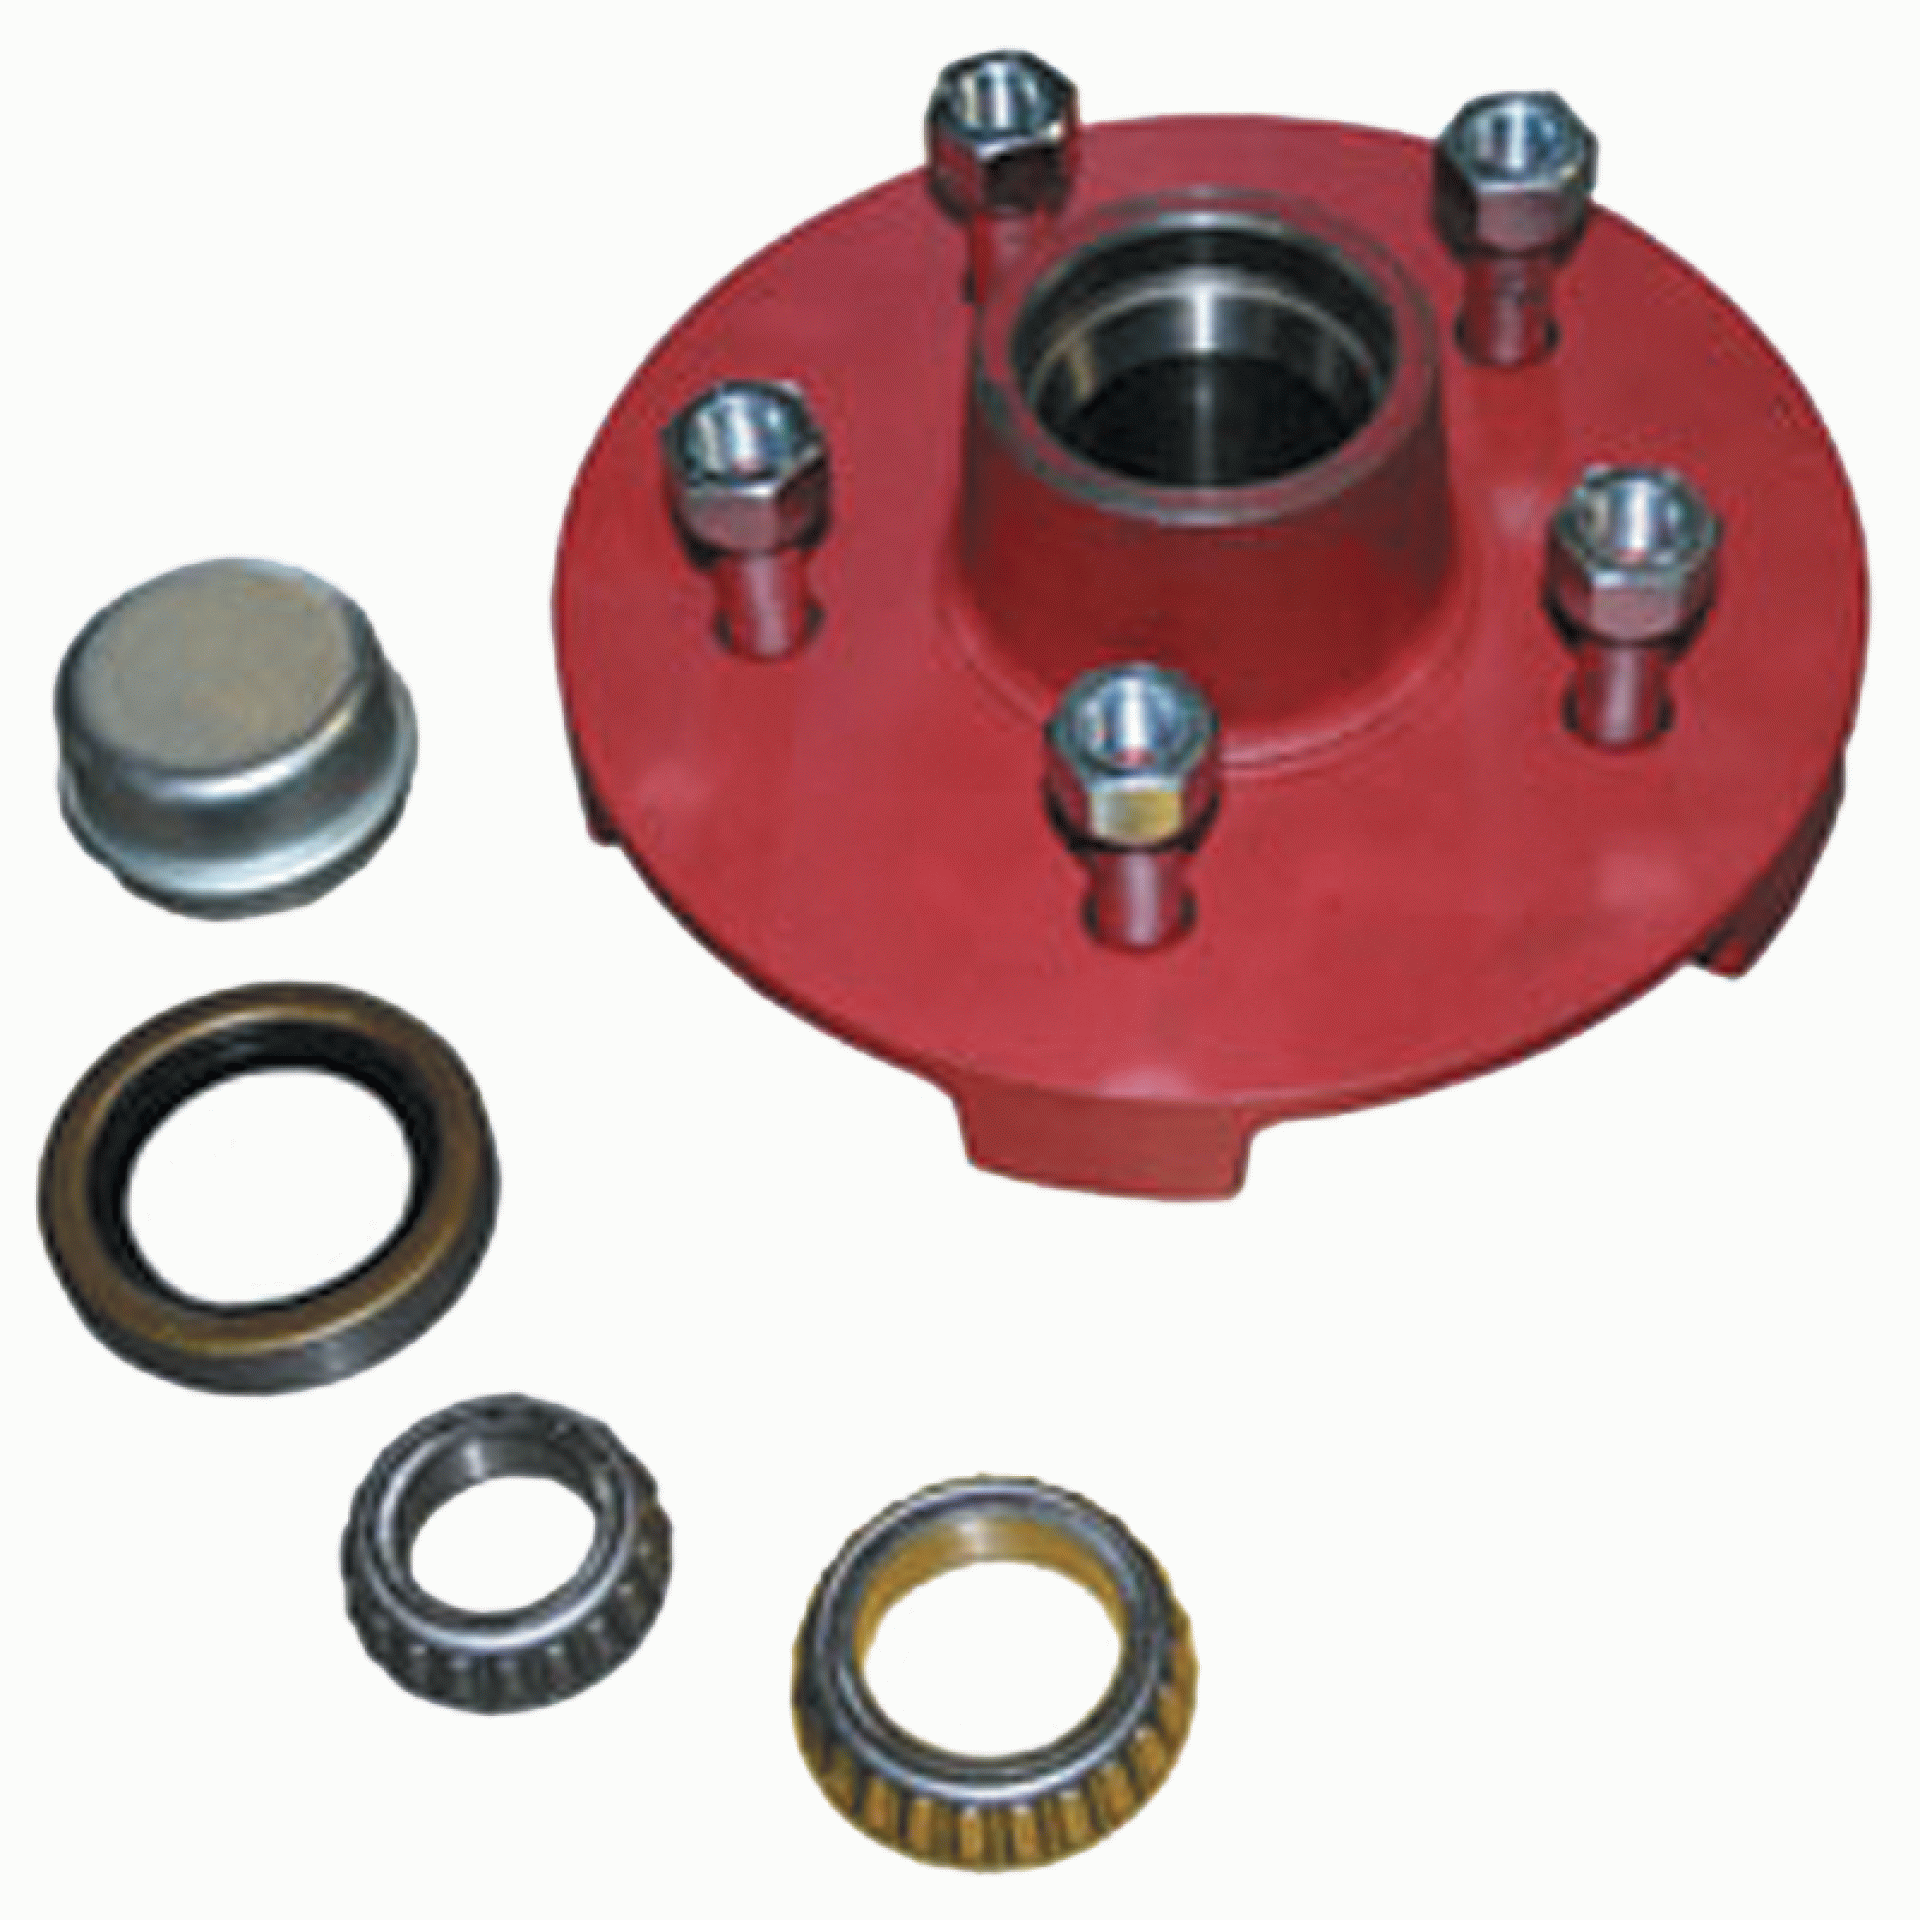 DEXTER MARINE PRODUCTS OF GEORGIA LC | 81092 | 1-3/8" - 1-1/16" SPINDLE 545 1750 LB. CAPACITY